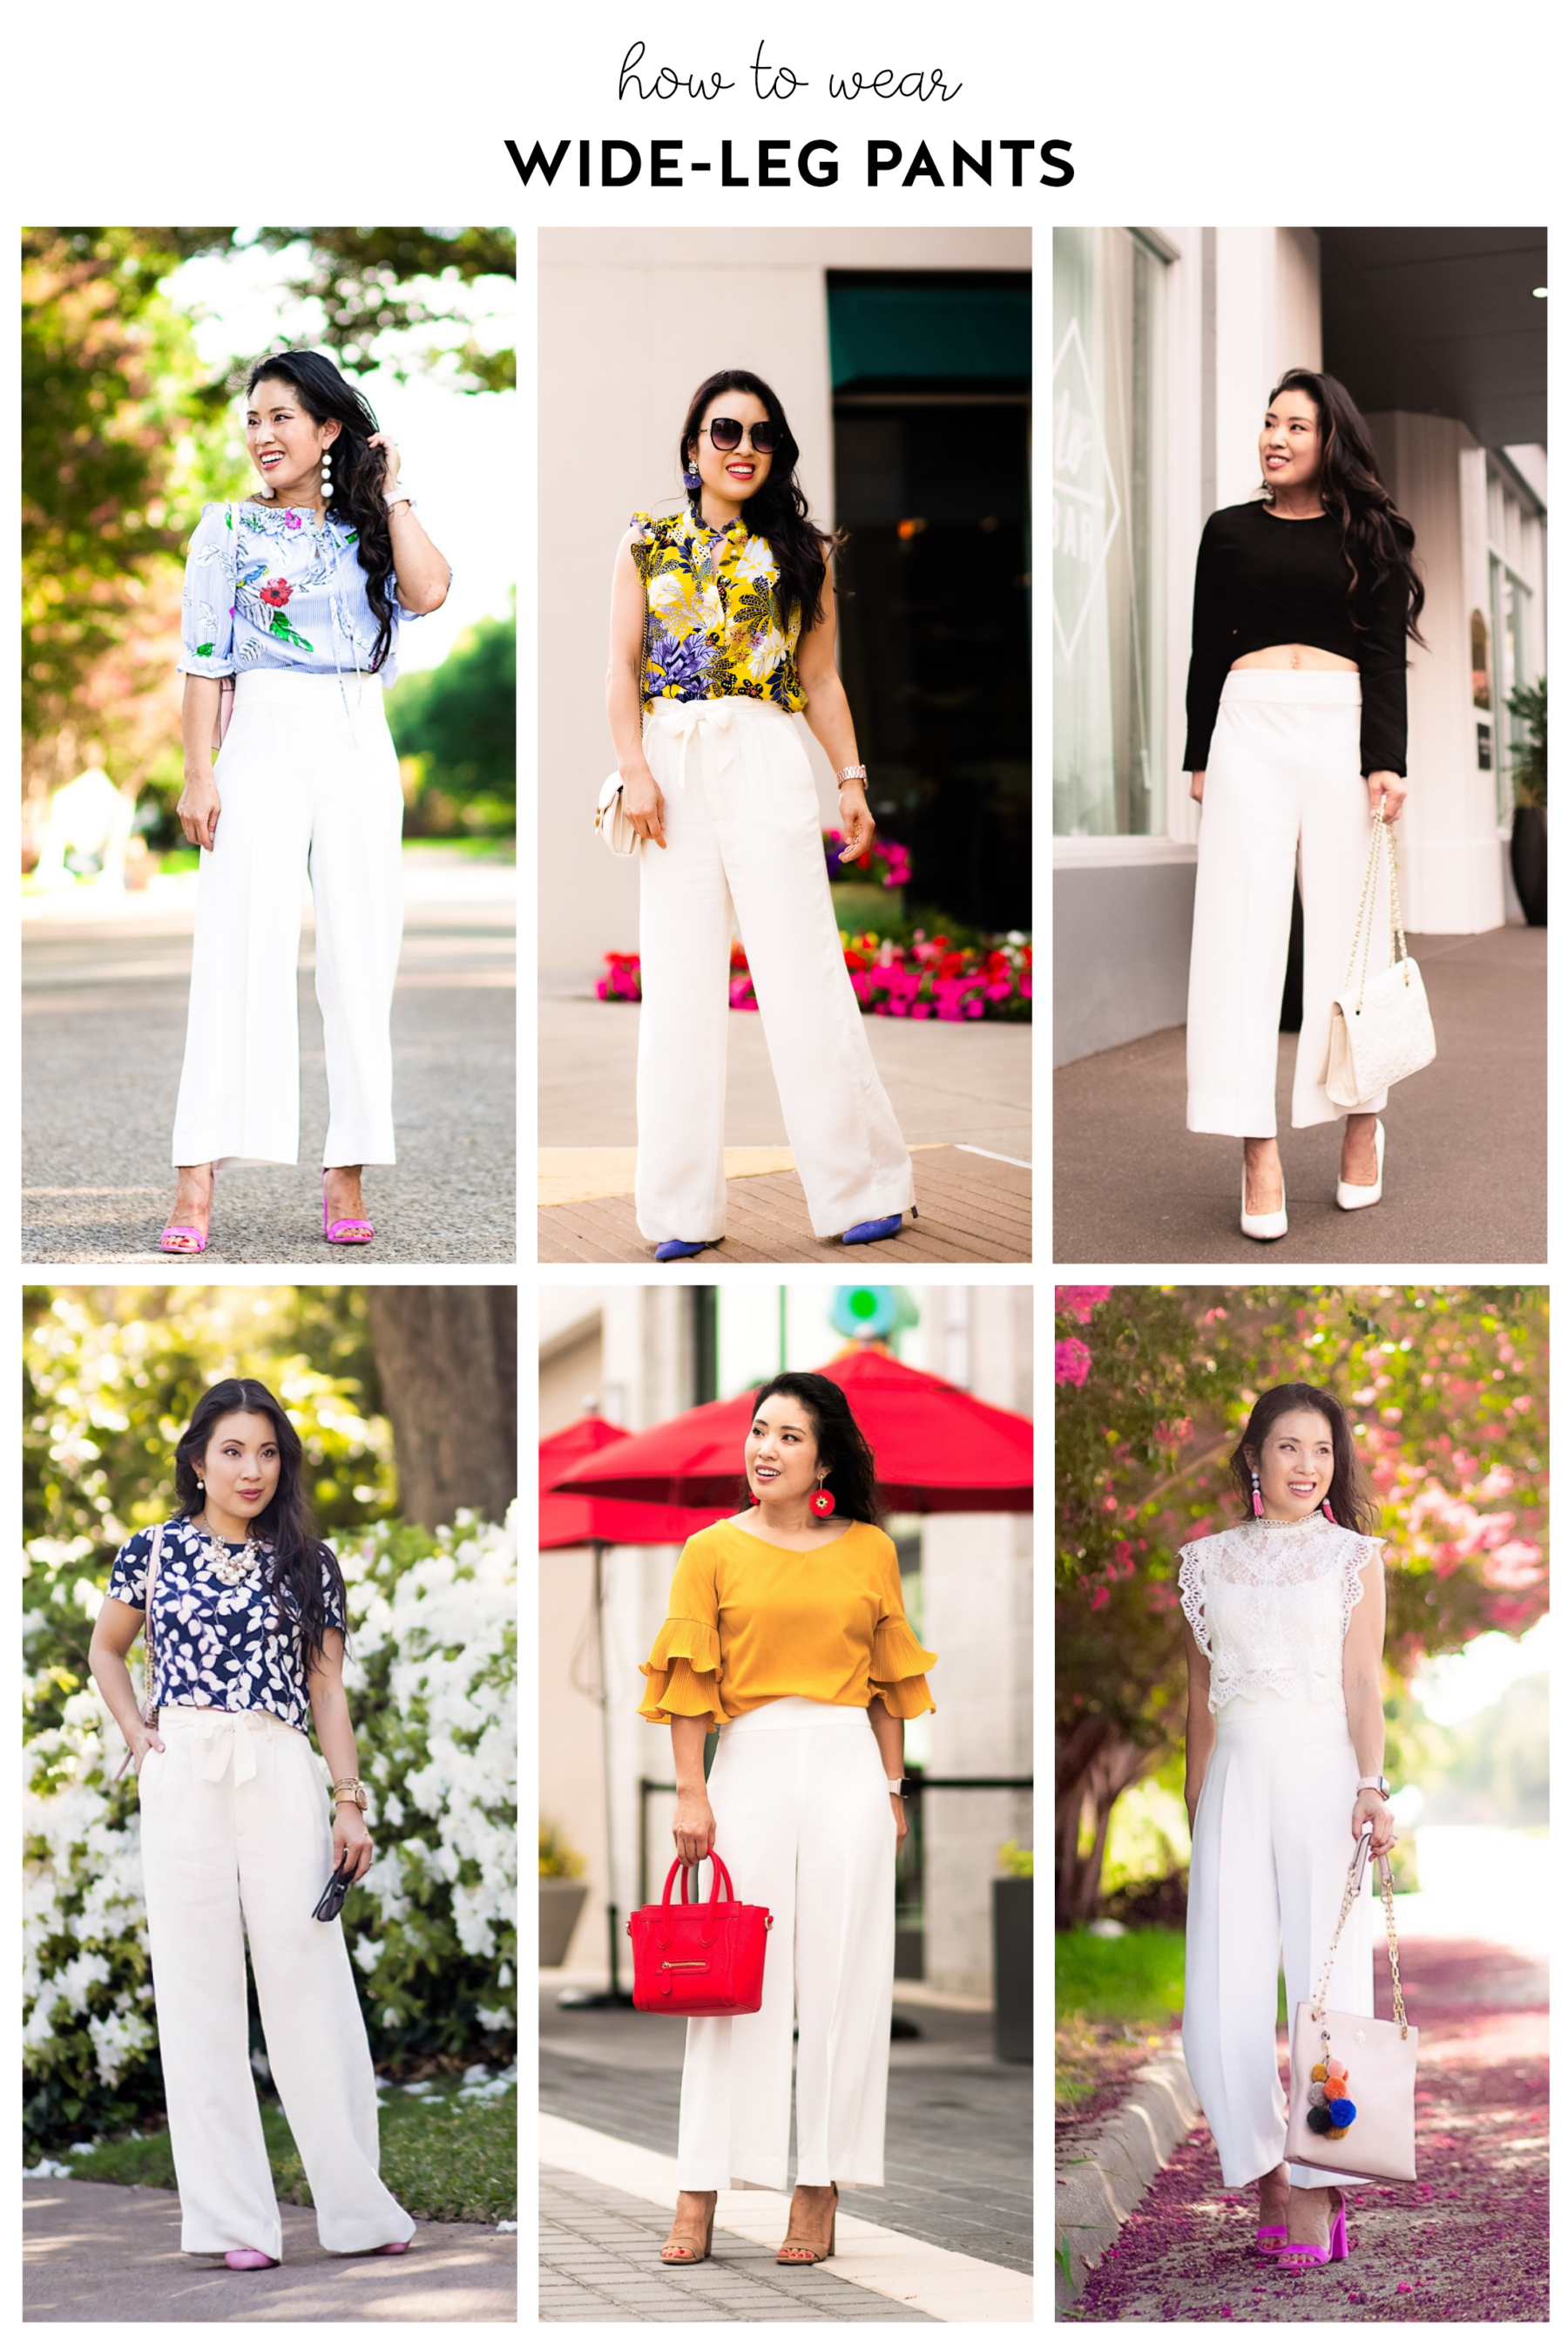 cute & little | dallas petite fashion blog | how to style wide-leg pants - Leg Pants (and how to wear them!) featured by popular Dallas petite fashion blogger, Cute & Little